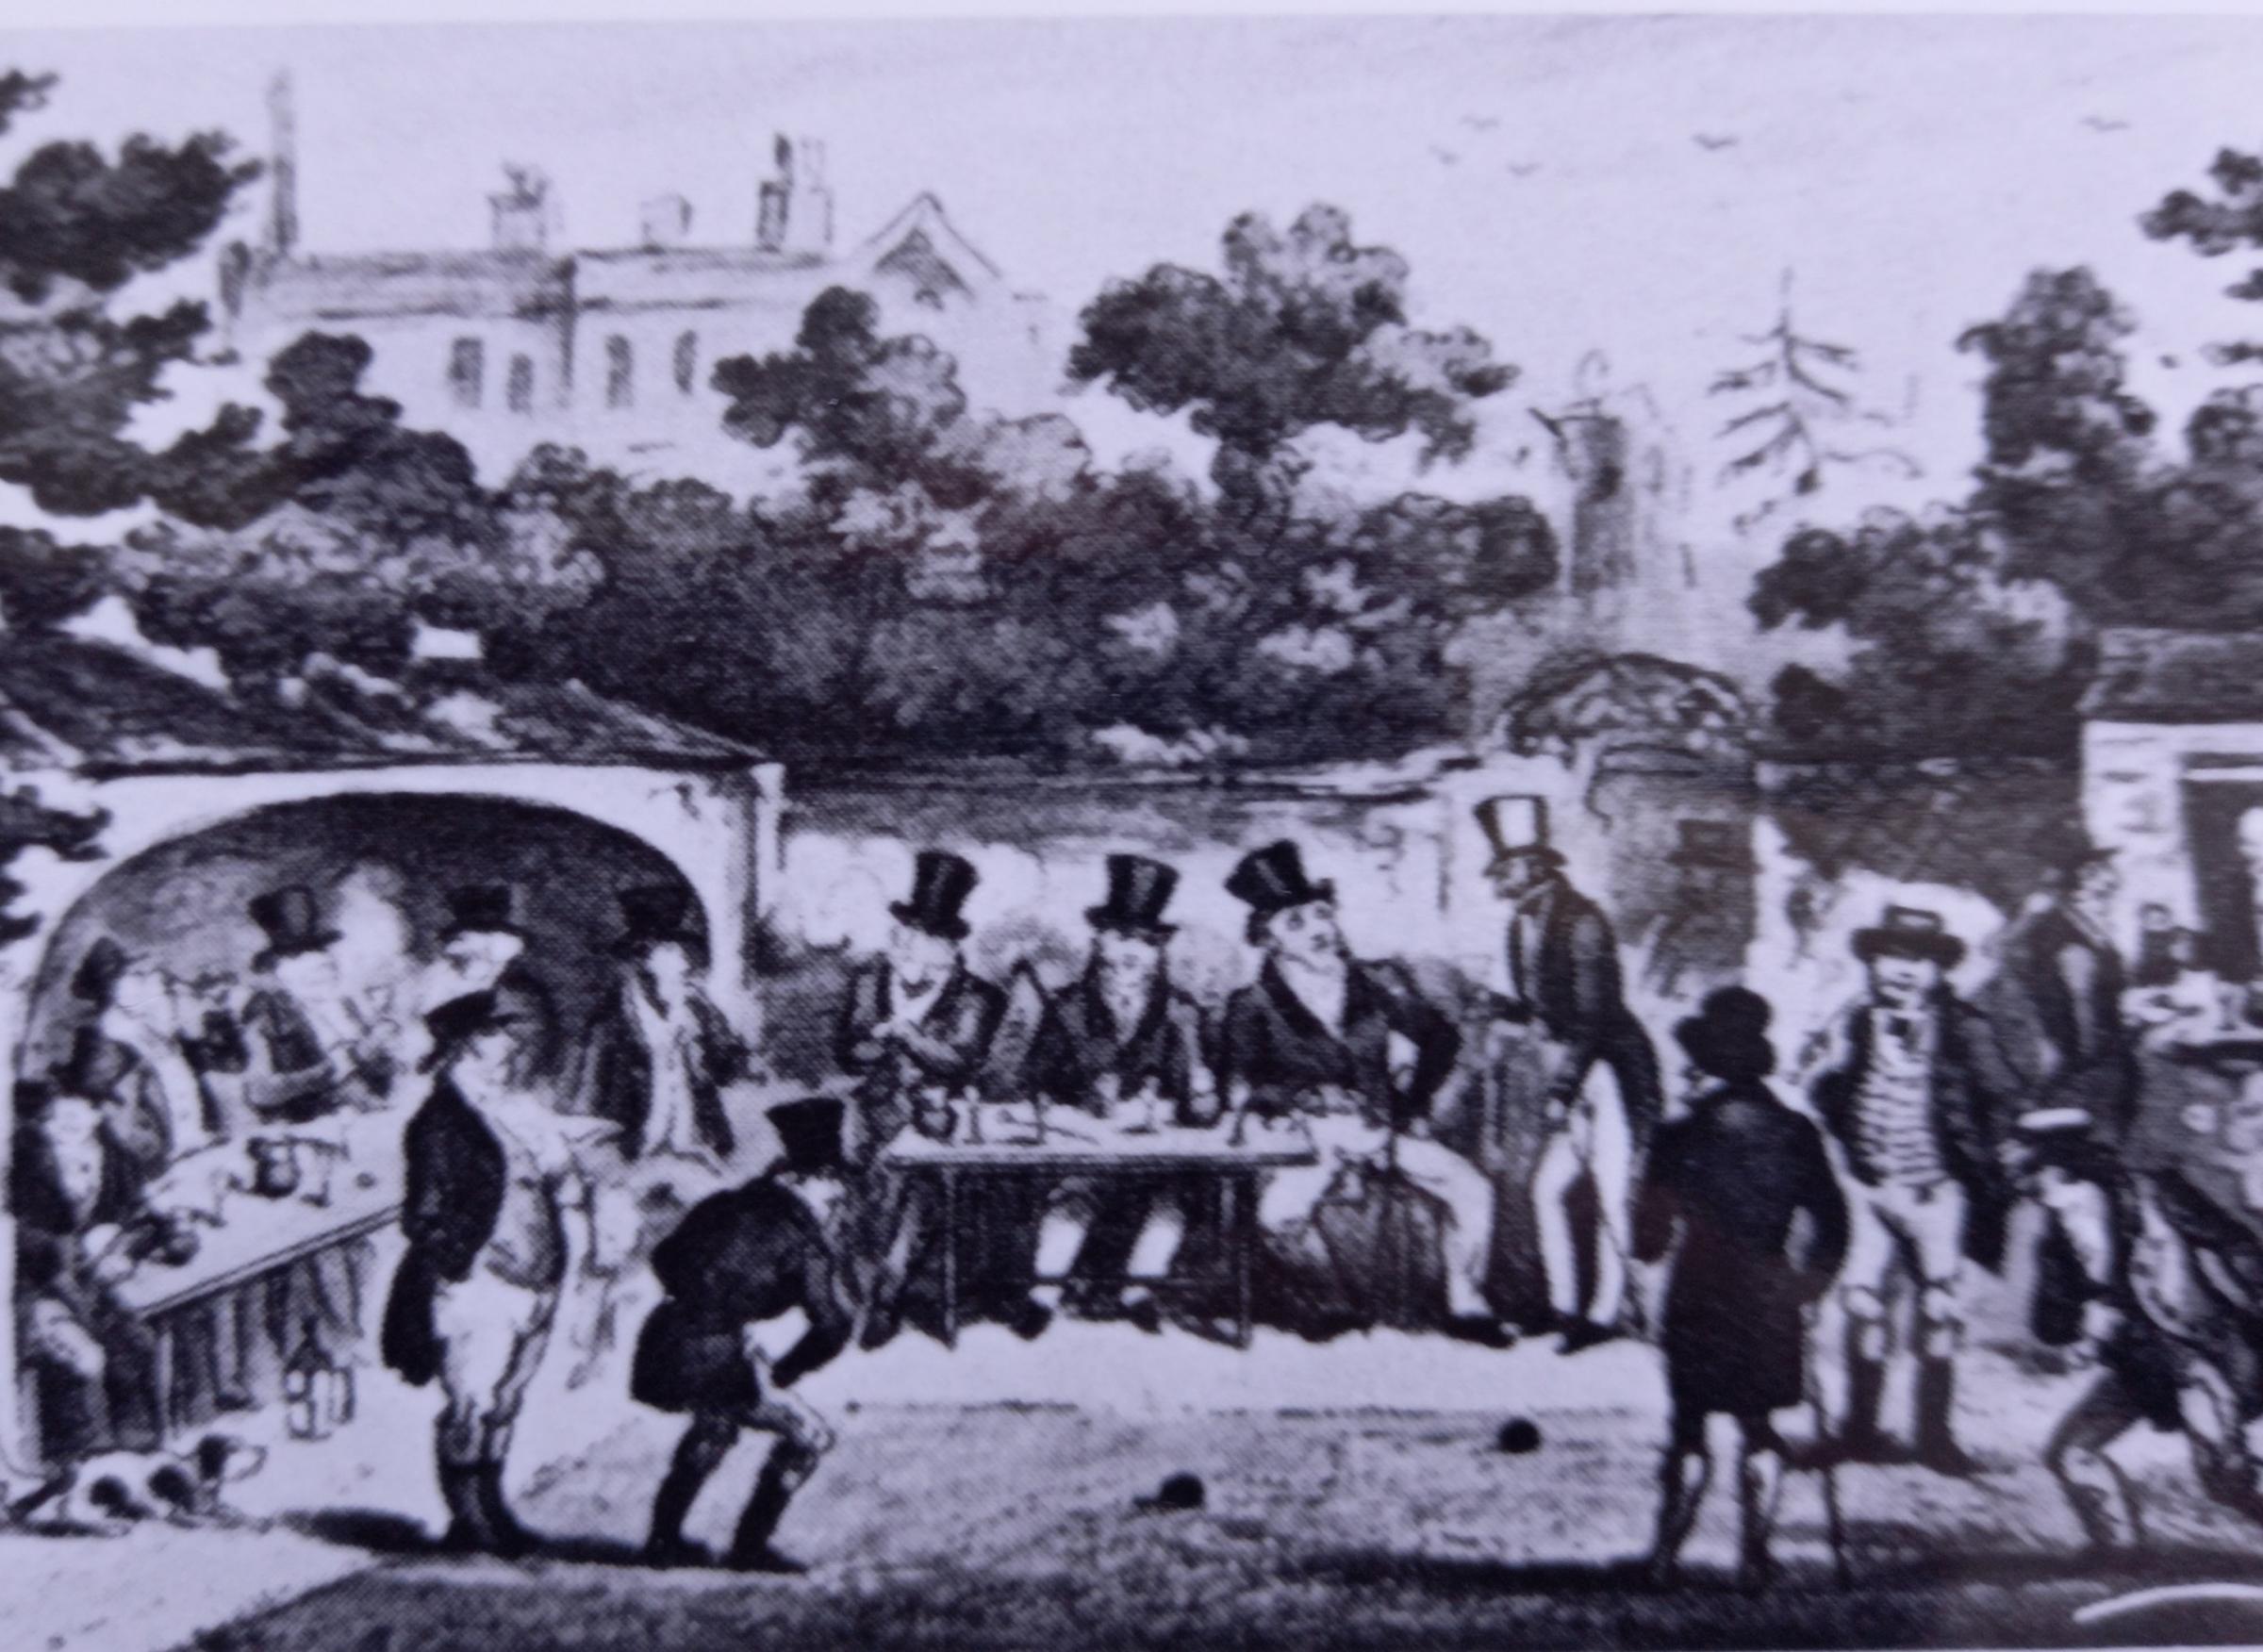 The bowling Green at Diglis Pleasure Gardens from an engraving dated 1830